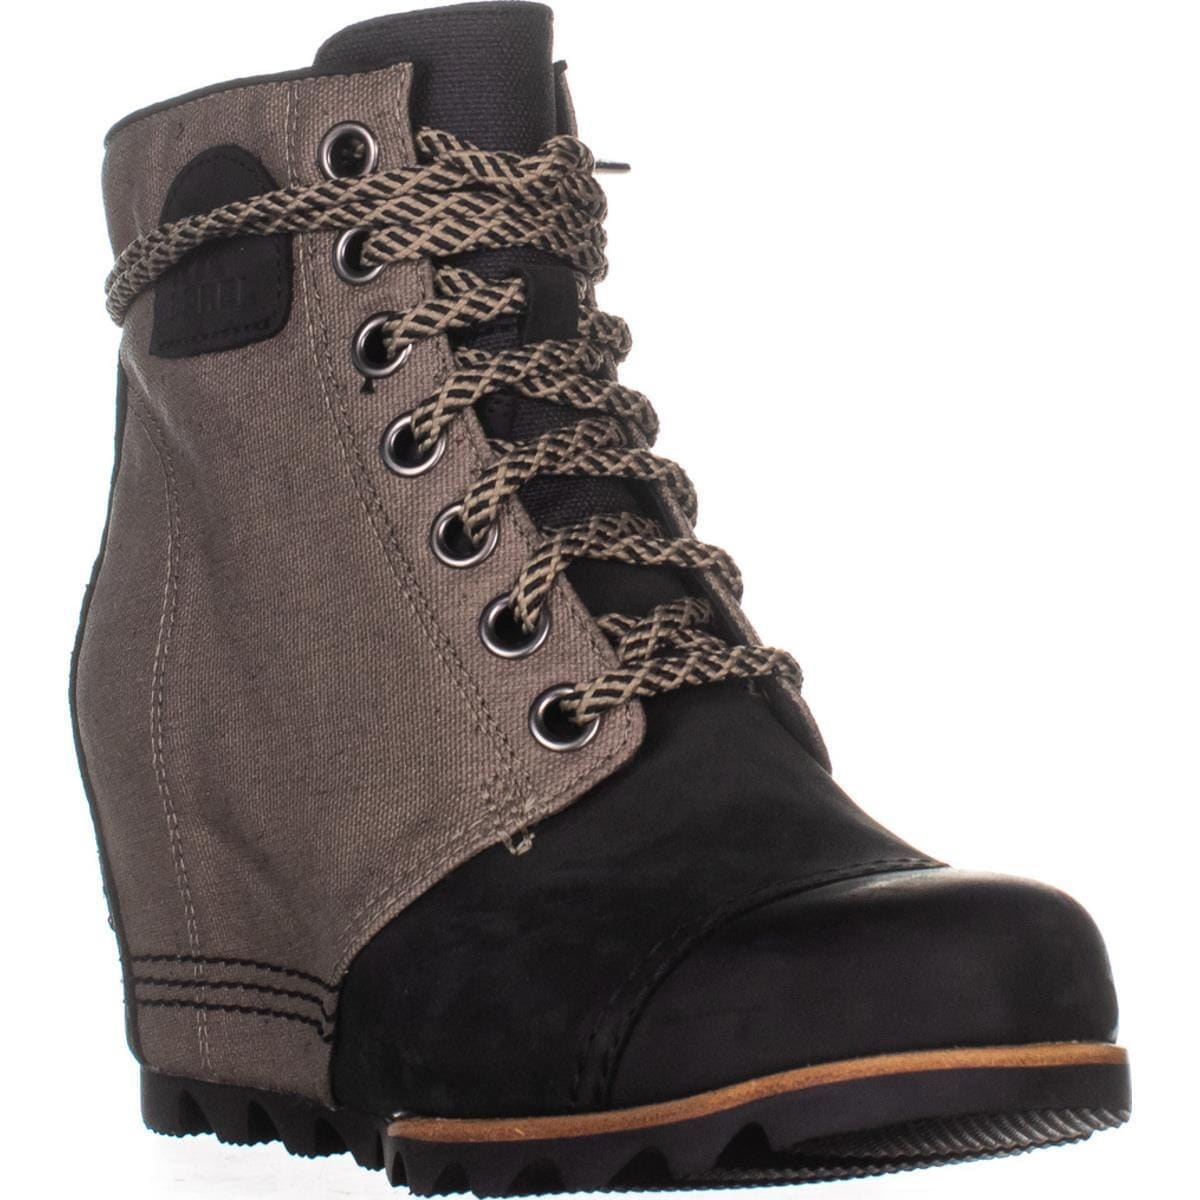 Shop Sorel PDX Wedge Casual Ankle Boots 